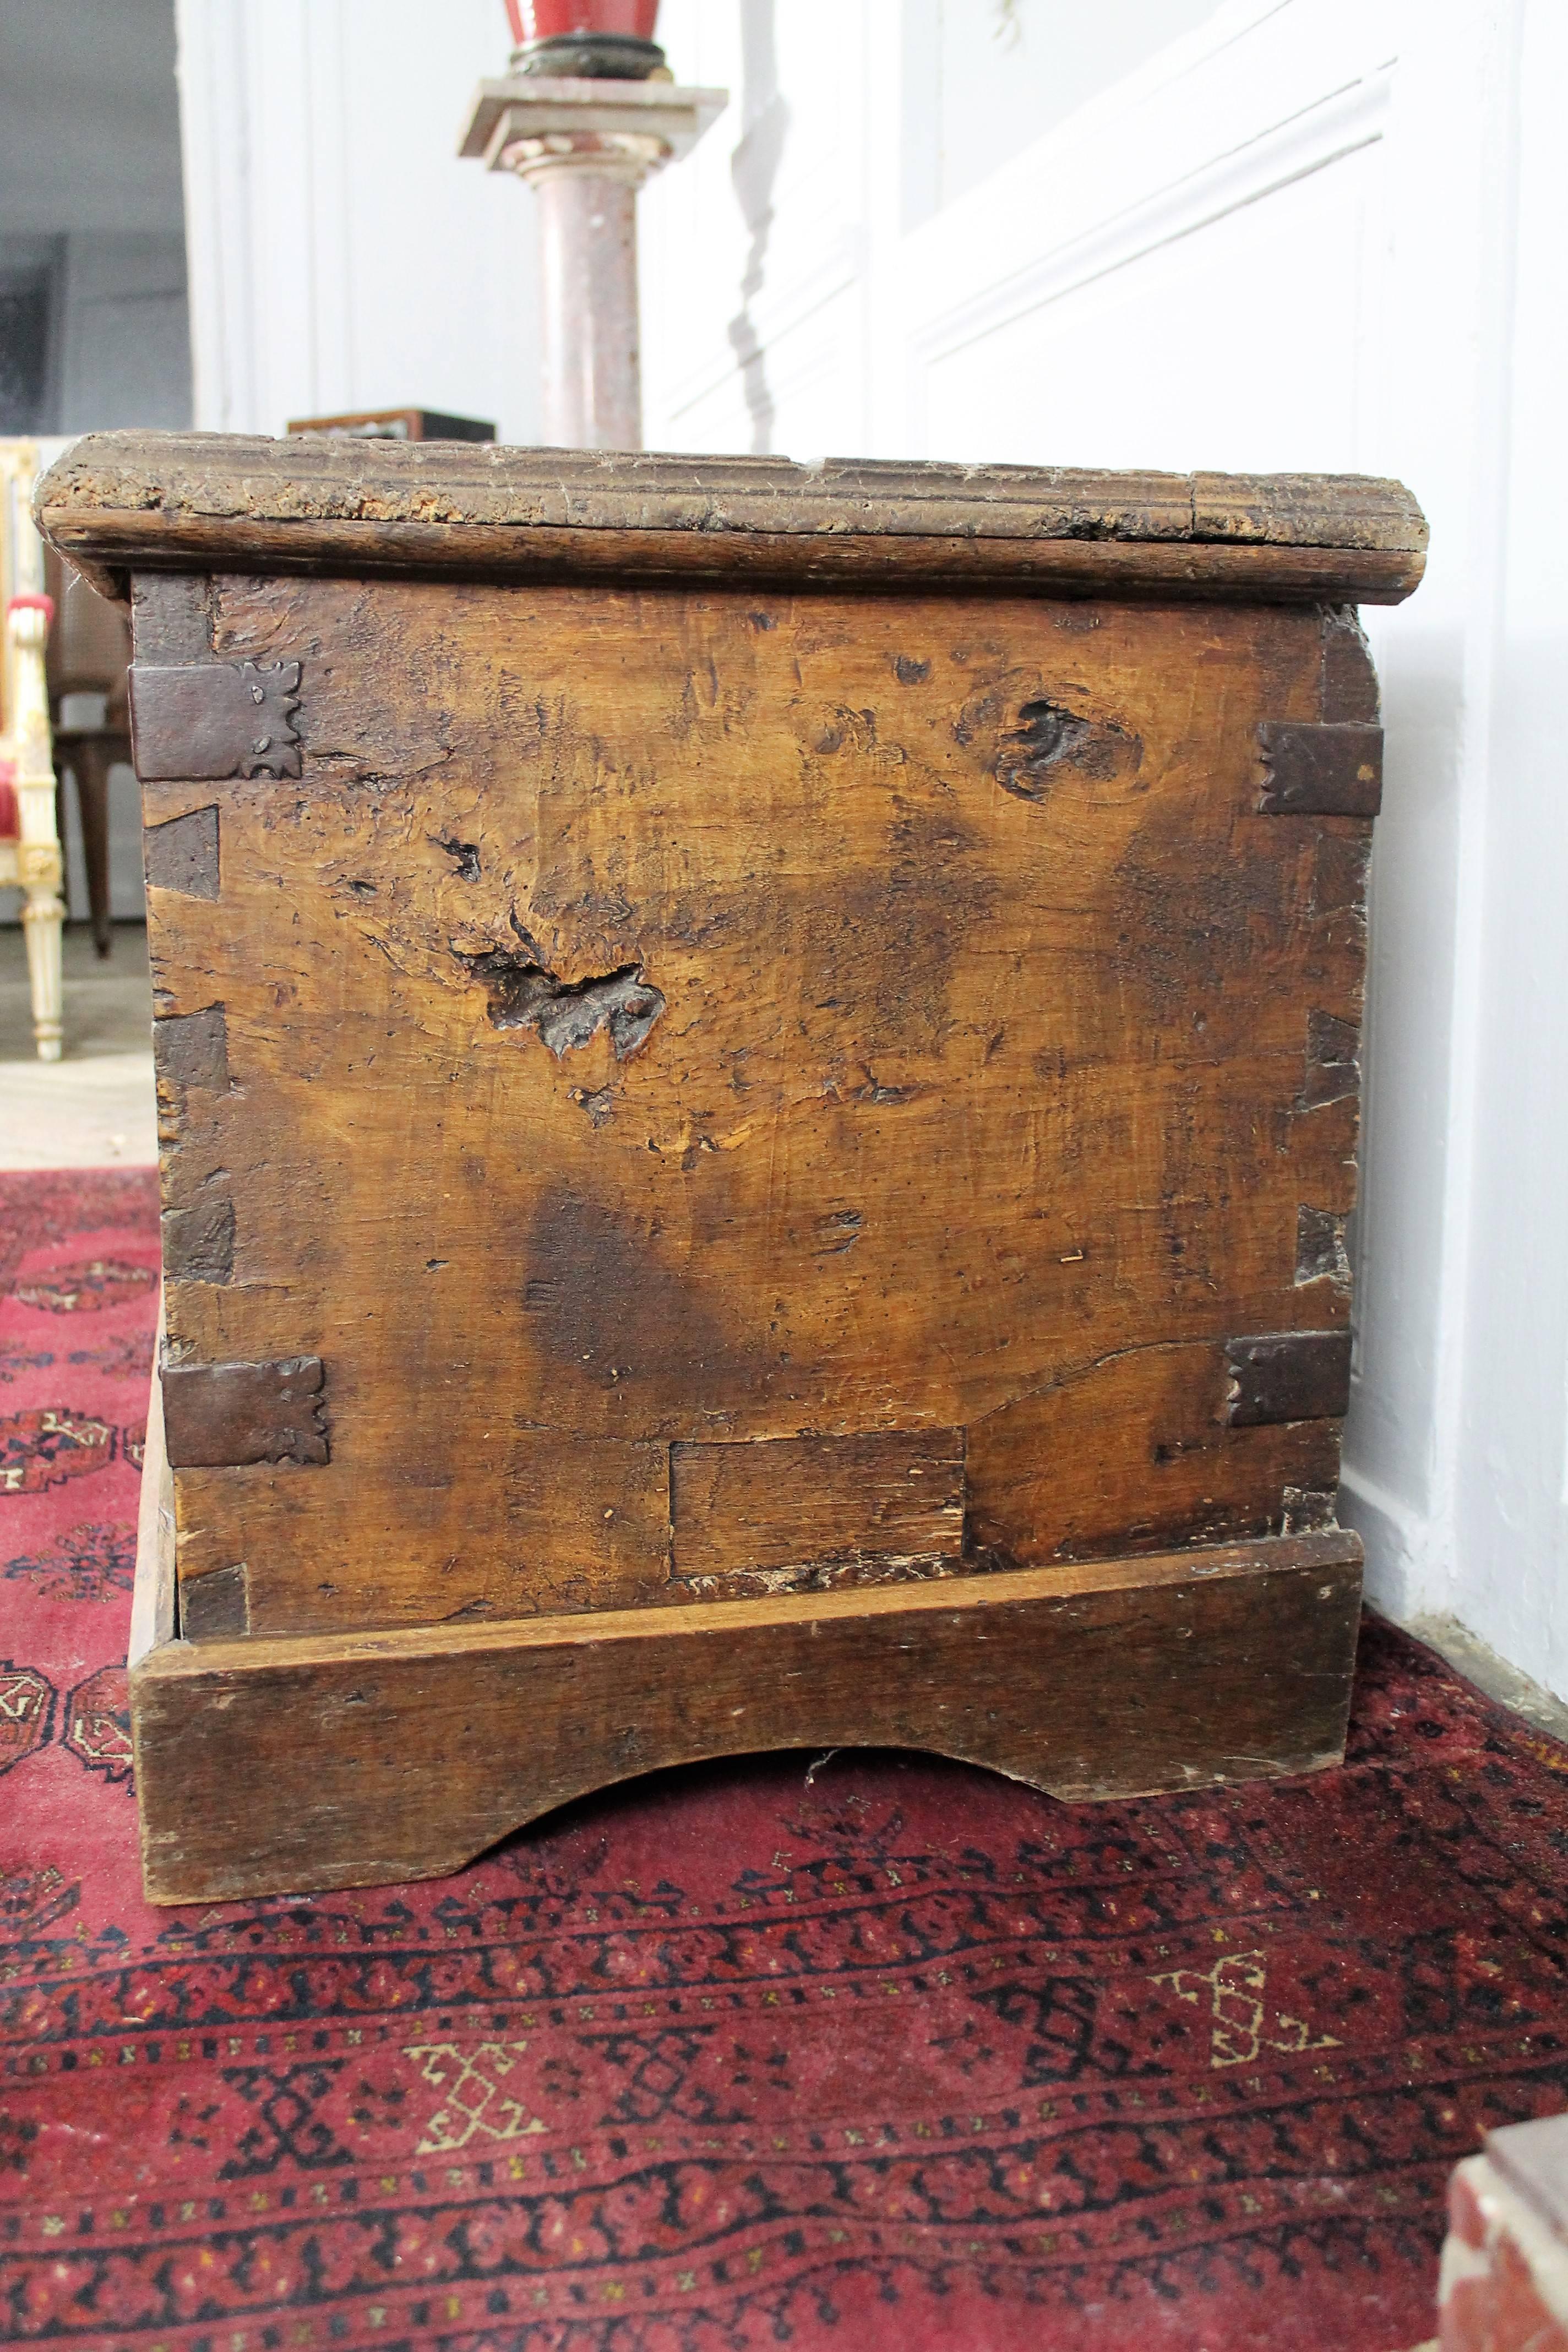 Nice 17th century Savoyard "Cassone" chest in brown walnut. Hand carved facade panel with rosette decorations. Plinth with brace decorations, dovetail assembly with wrought iron corner reinforcements. With old restorations, the hinges were